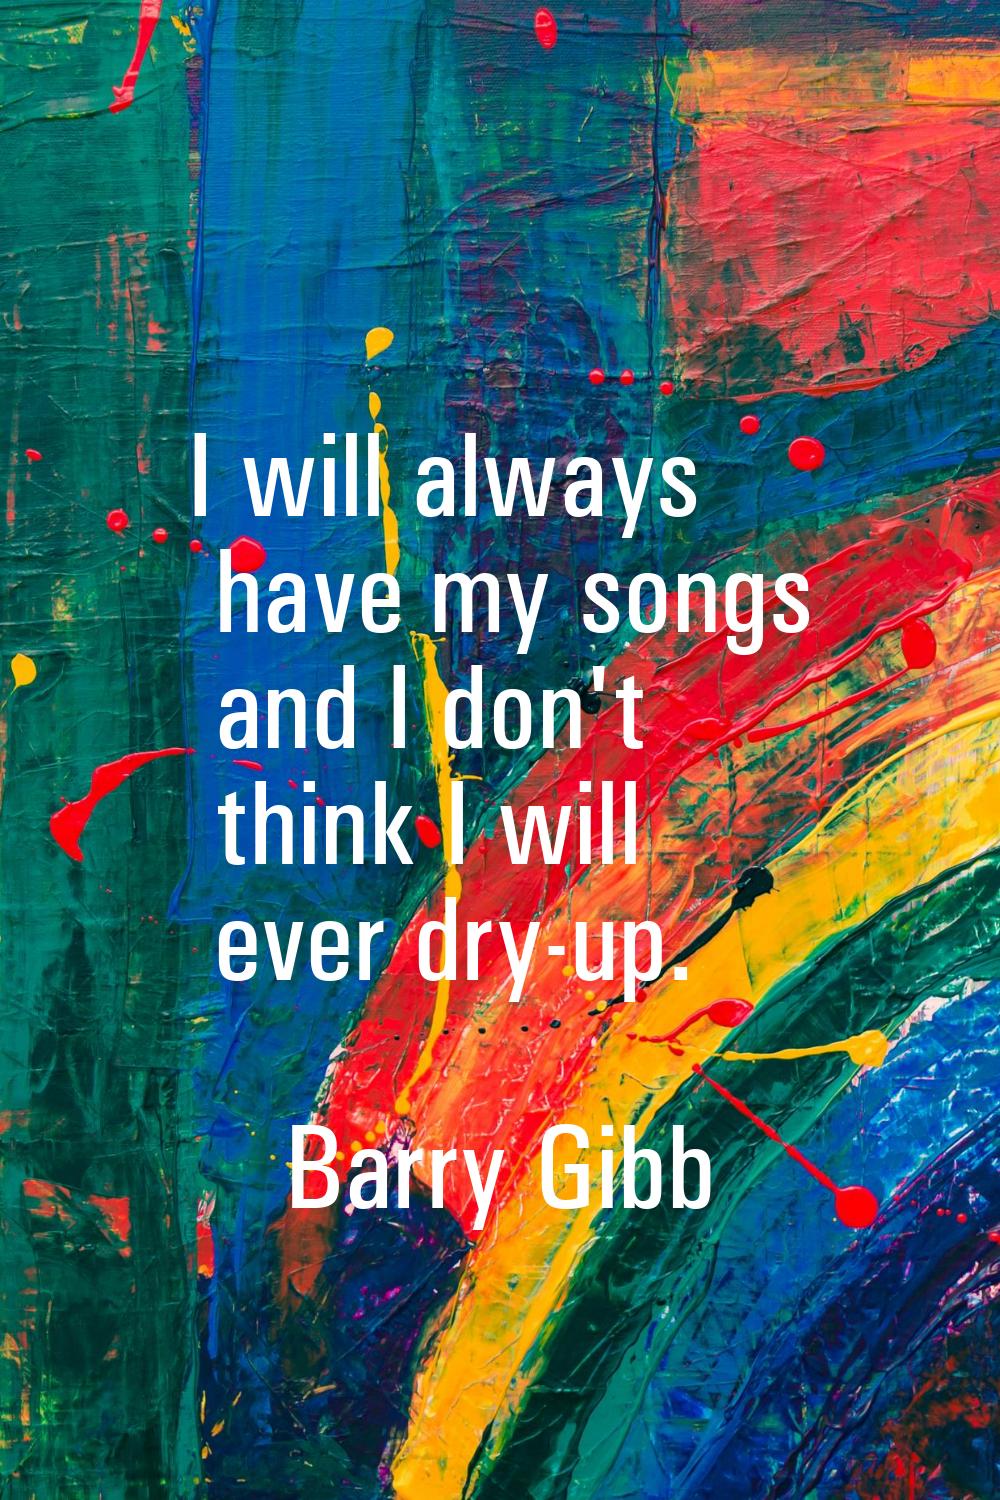 I will always have my songs and I don't think I will ever dry-up.